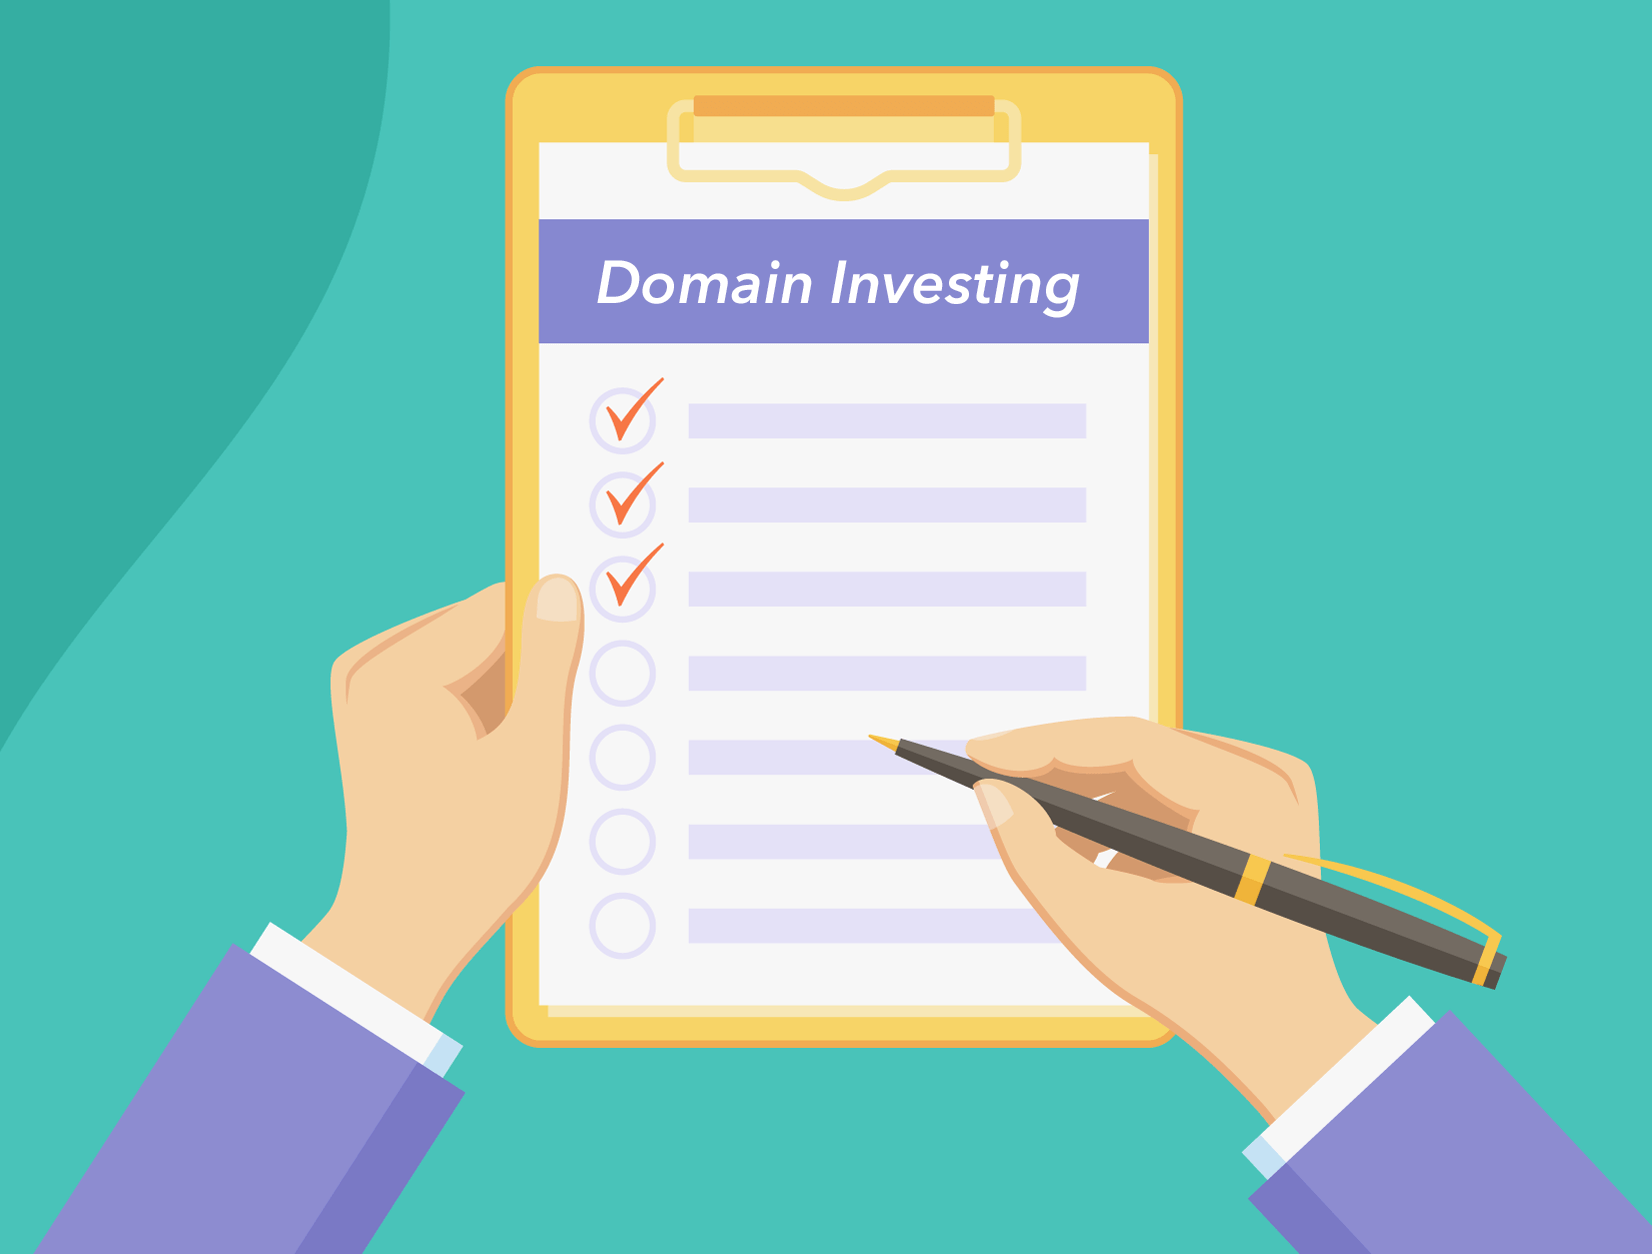 3 things you should do if you want to start investing in domain names